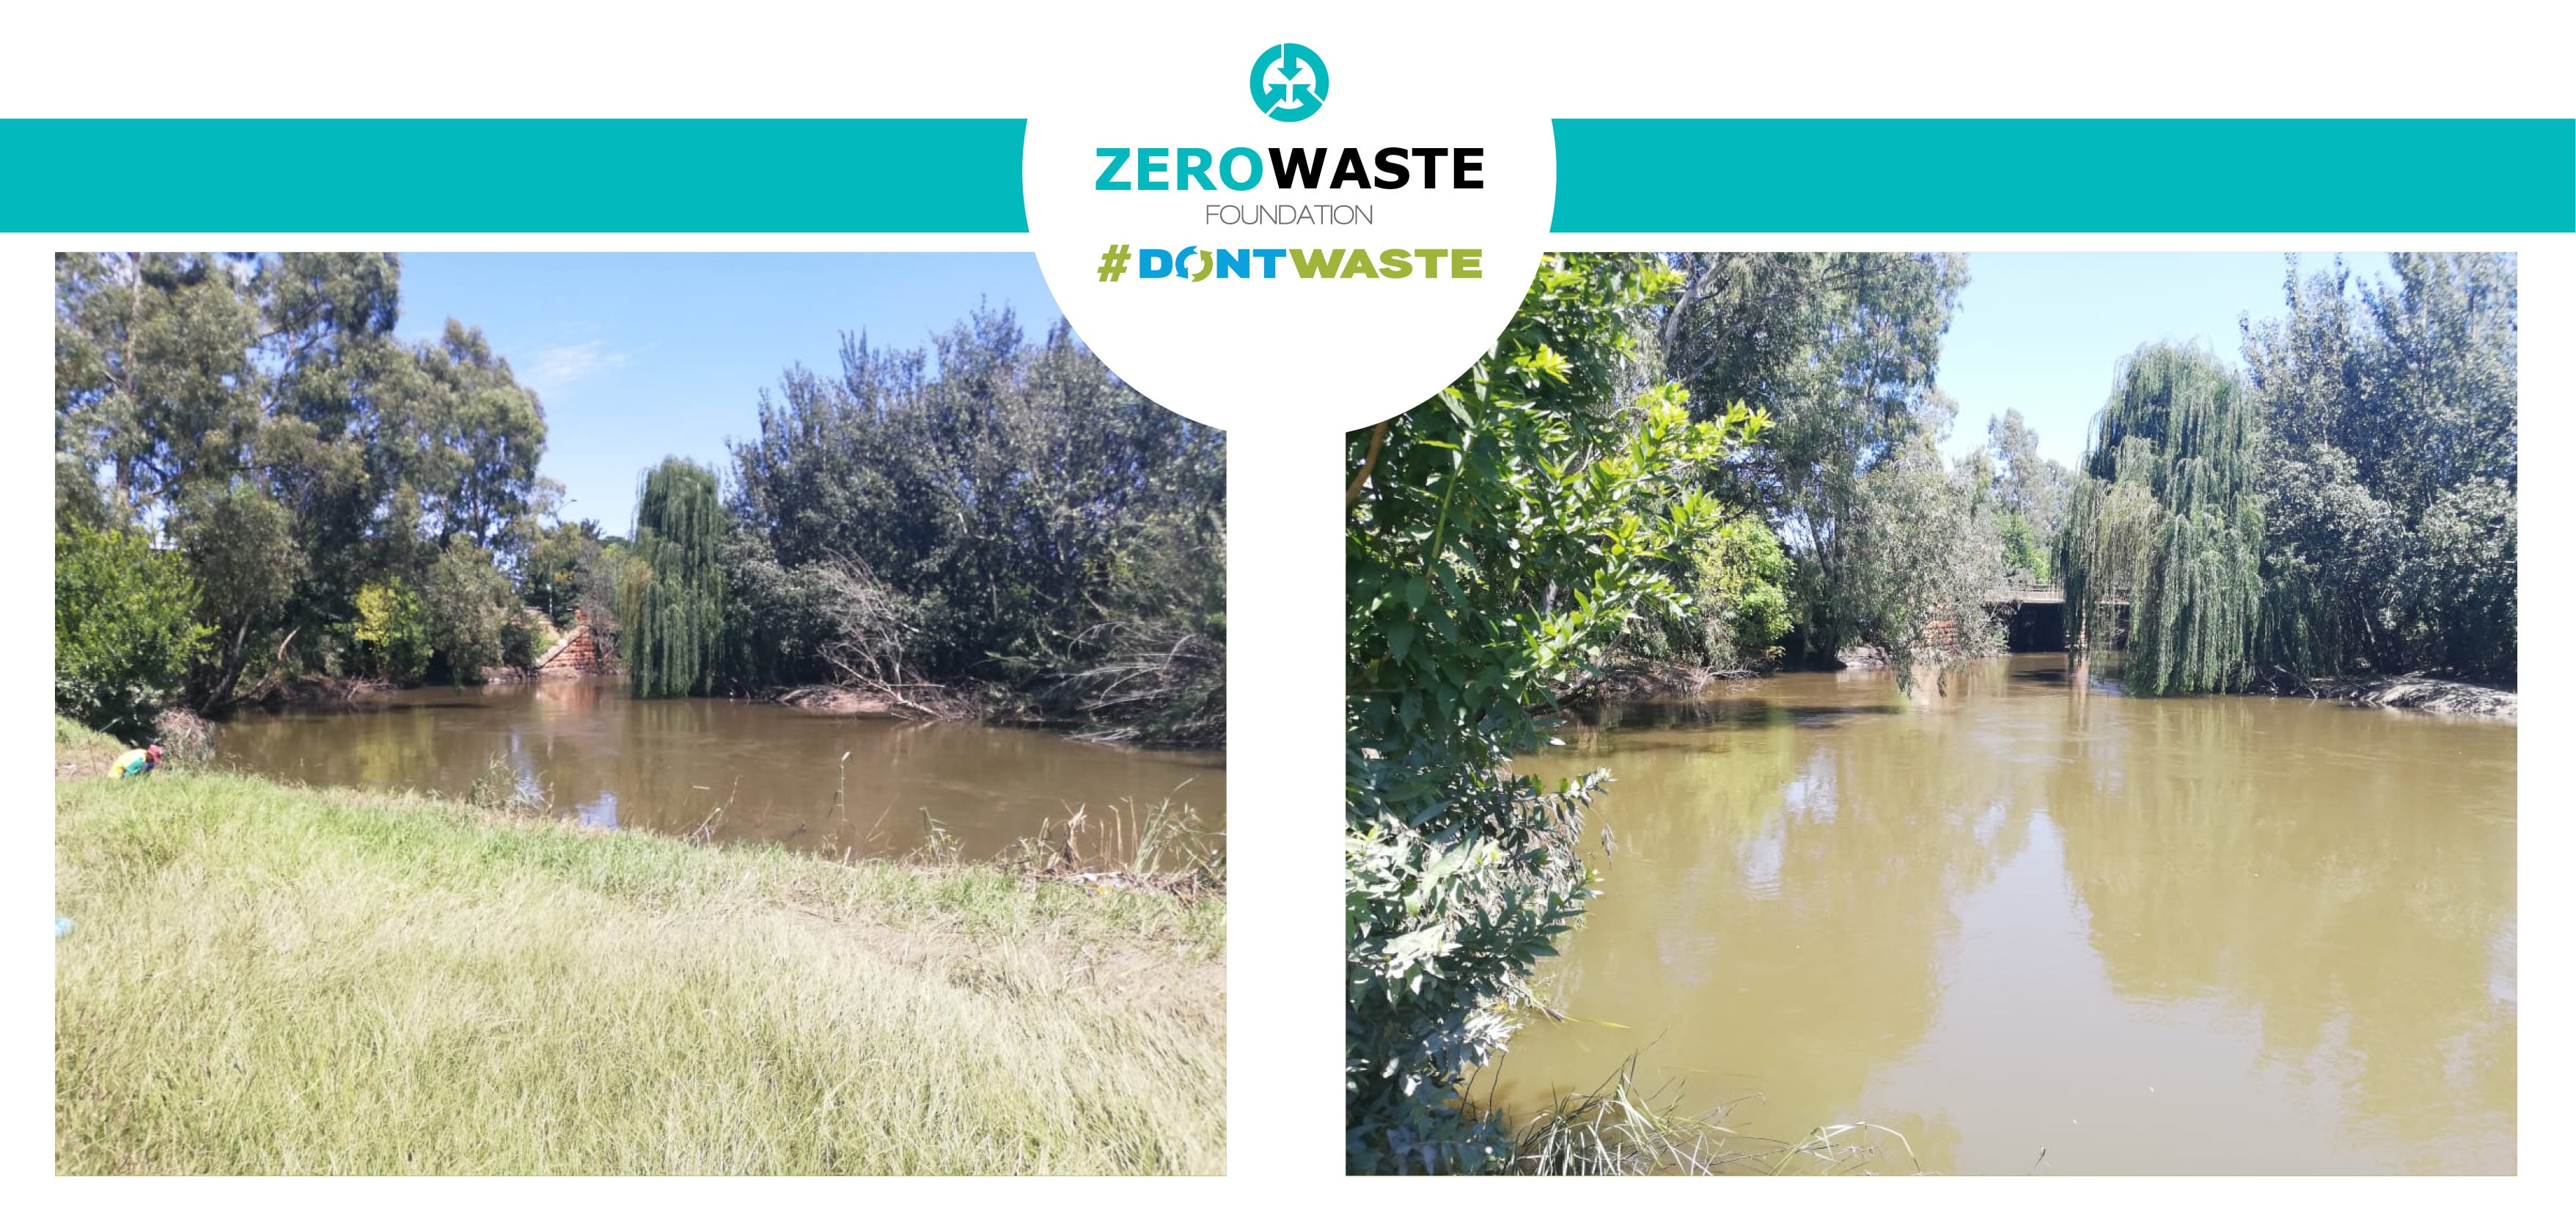 Clean-Up of the Blesbokspruit River